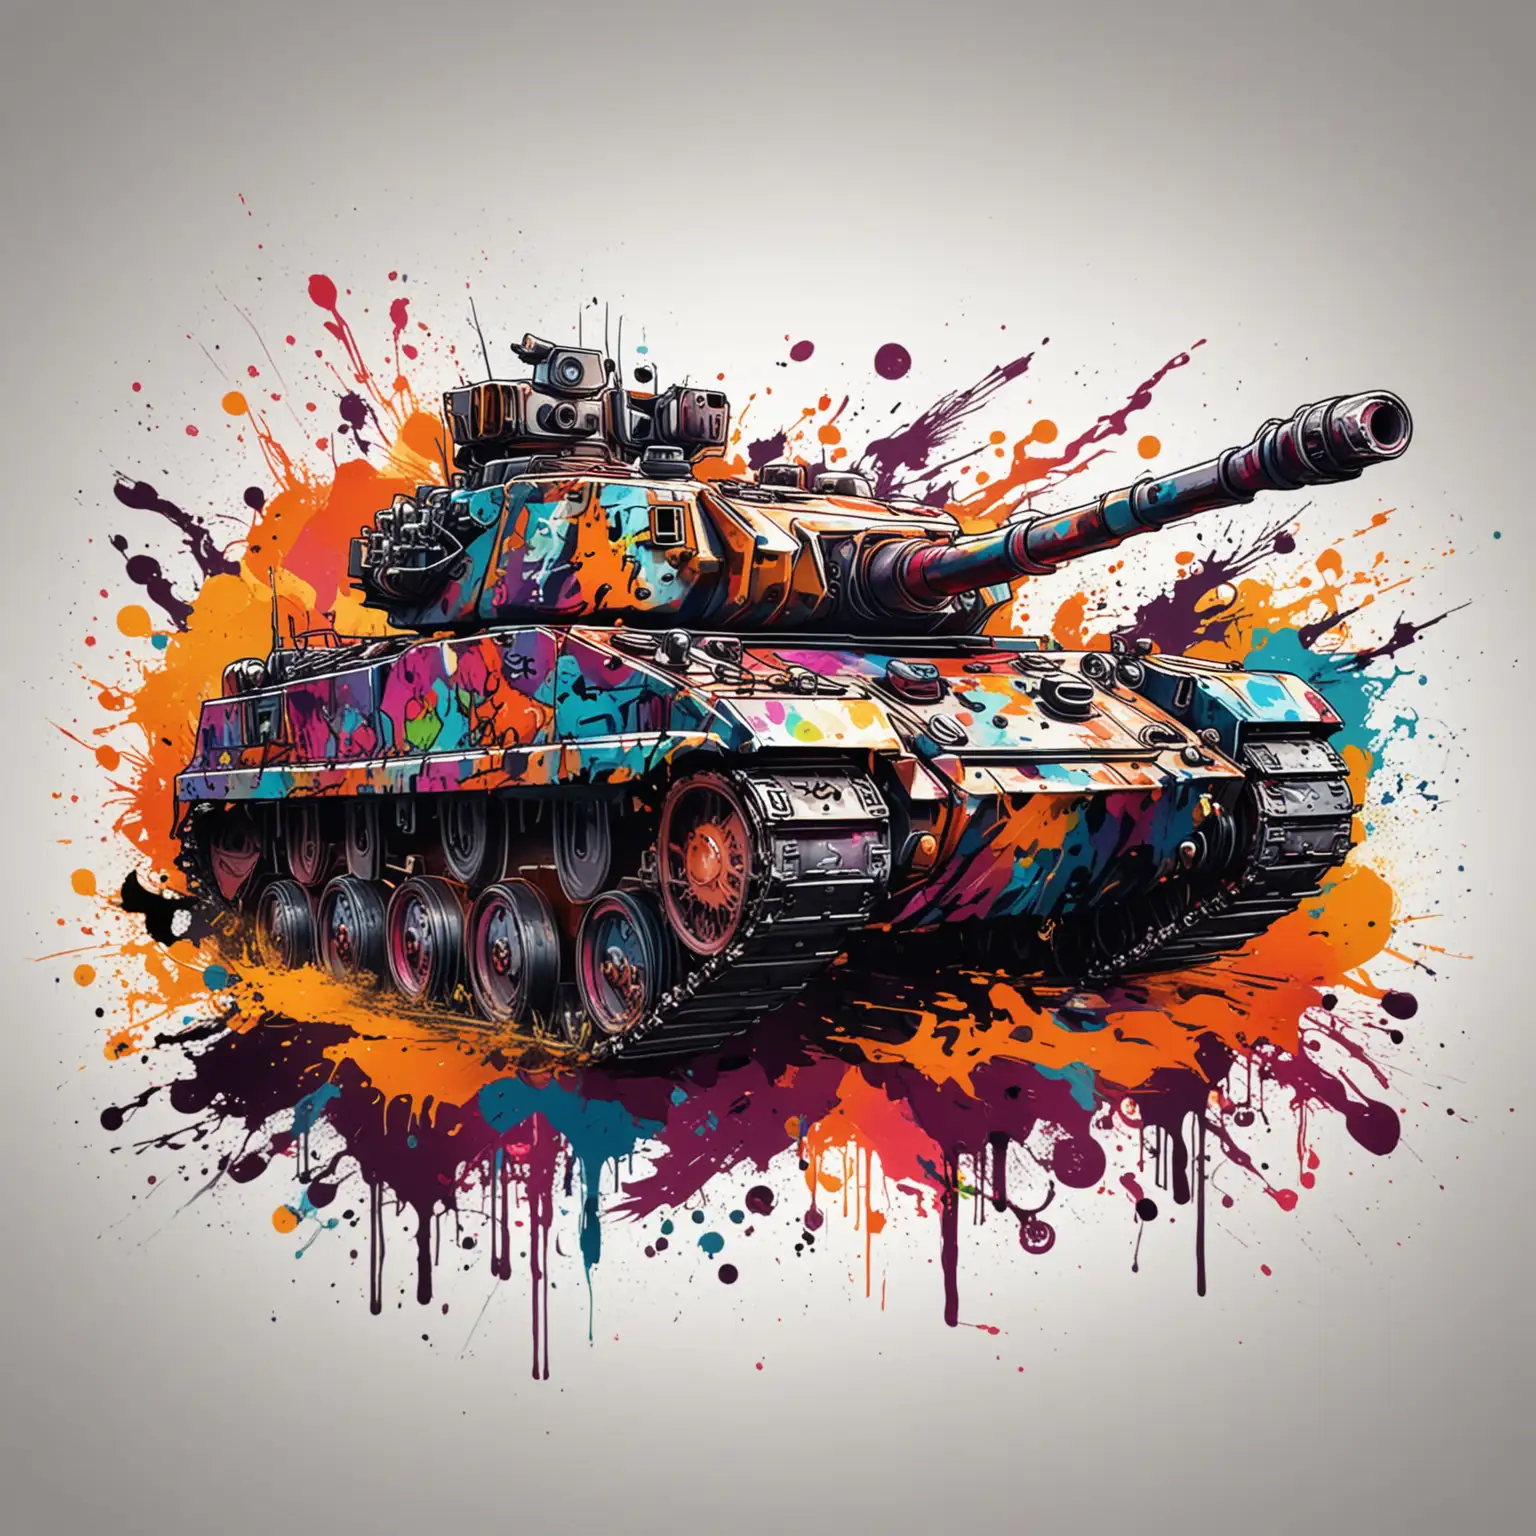 Colorful Abstract Hip Hop Halloween Painting with Graffiti Cartoon and US Tank